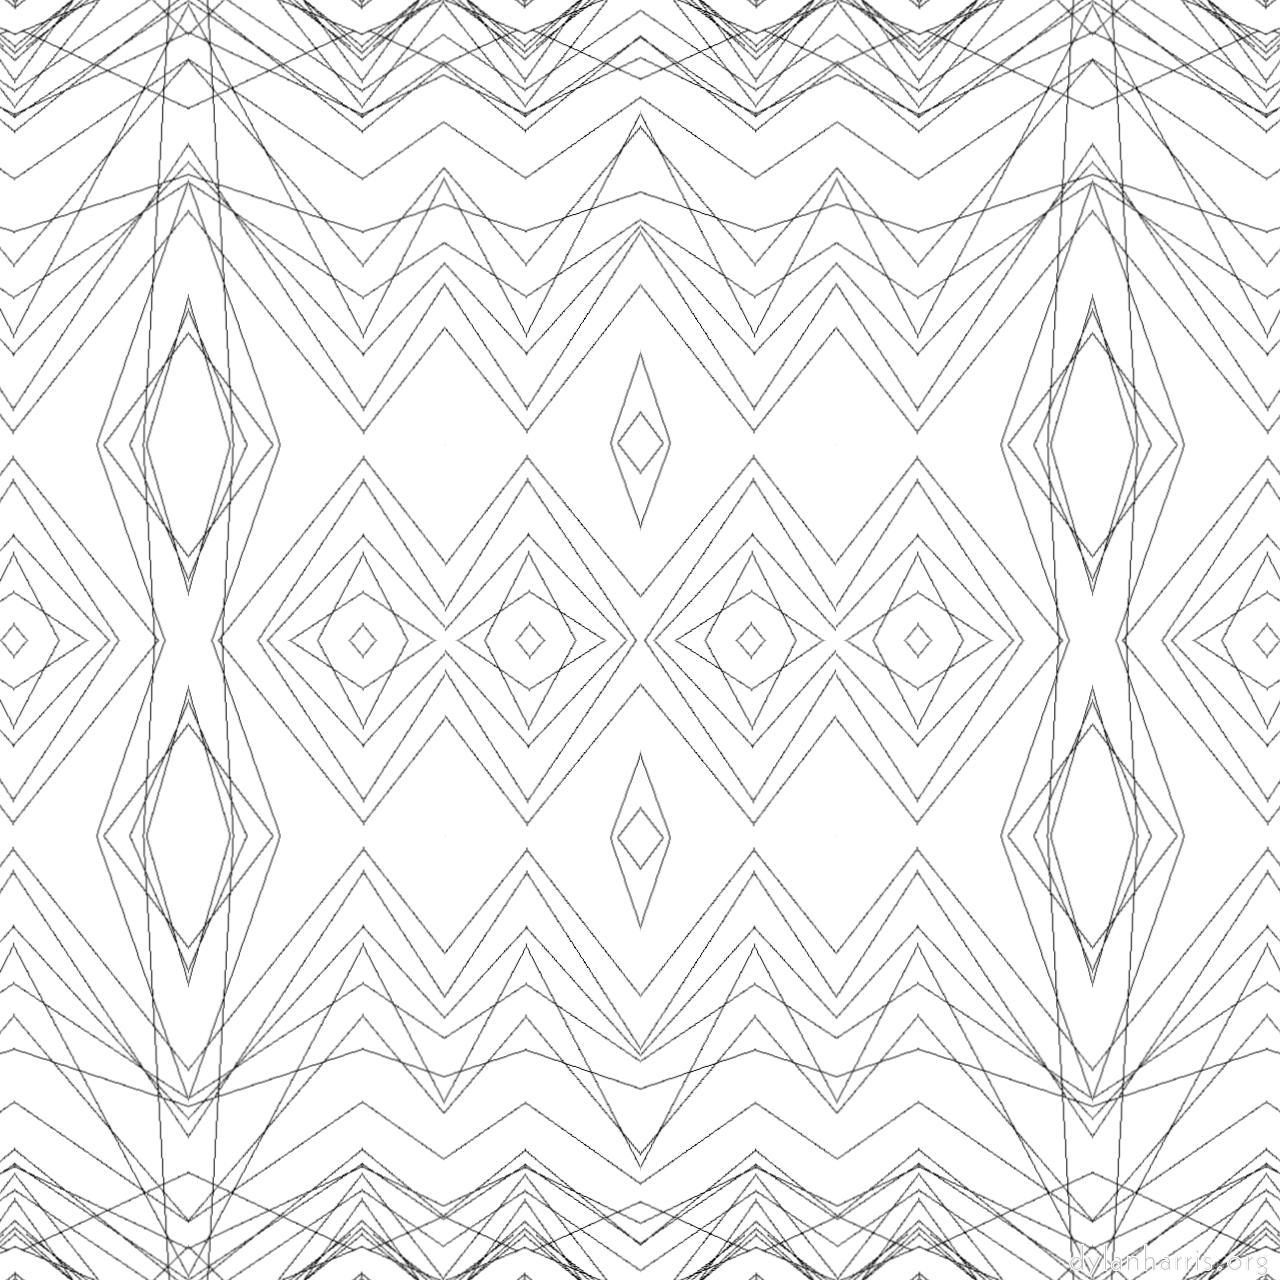 variations :: abstract line drawing 3